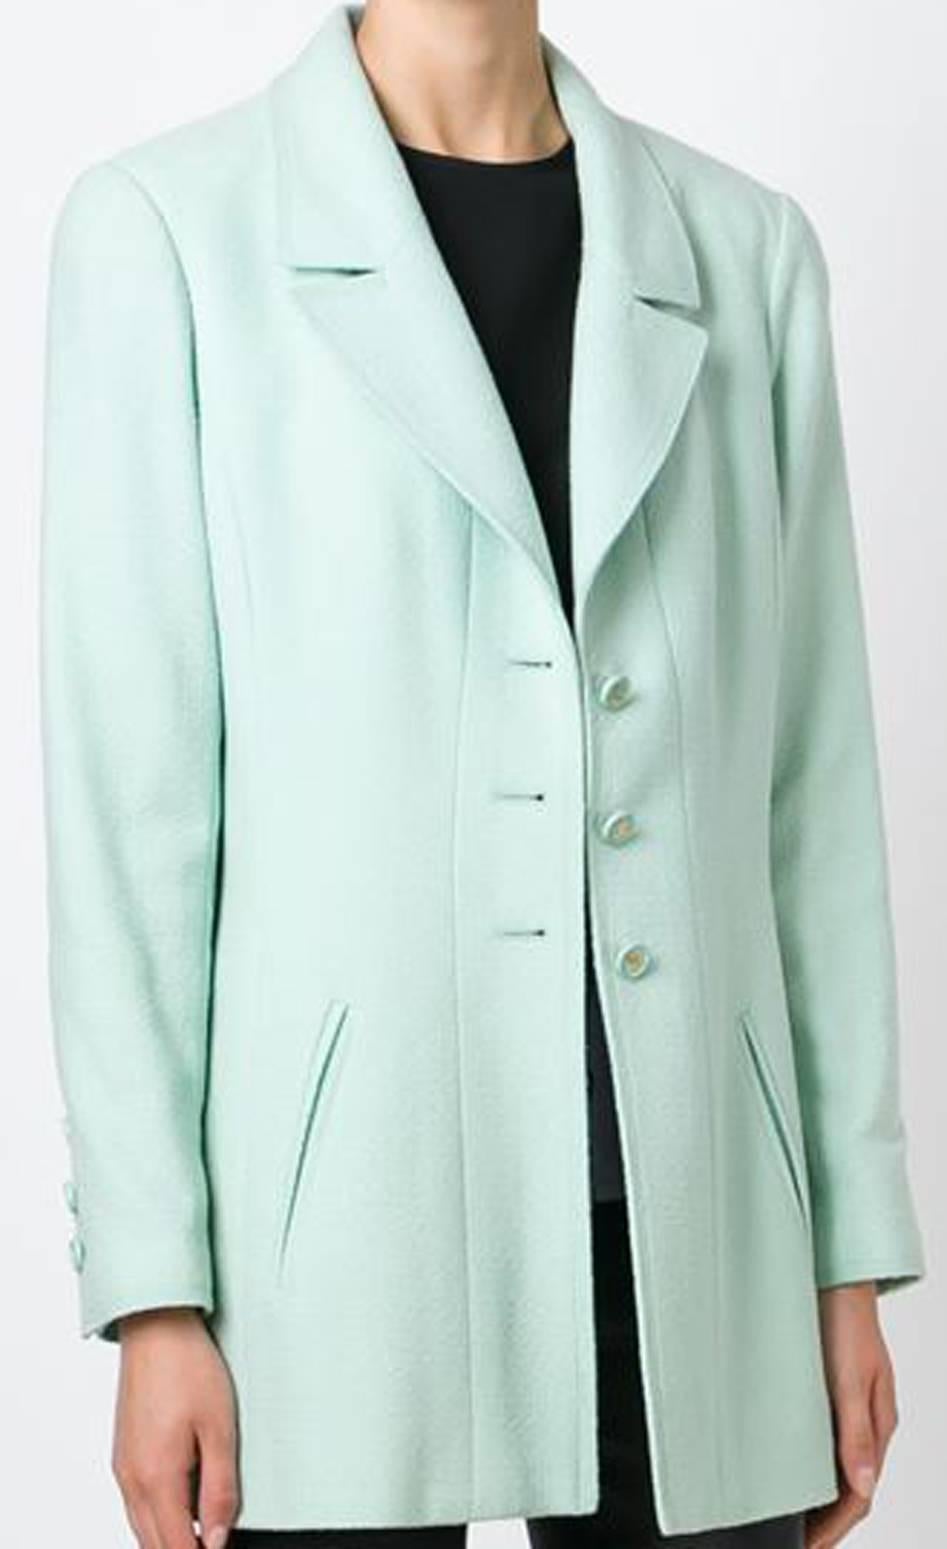 Chanel pastel green wool blend bouclé knit blazer featuring notched lapels, front logo button fastening, front welt pockets, long sleeves, logo button cuffs and a silk logo lining, and a gold-tone chain trim. 
In excellent vintage condition. Made in